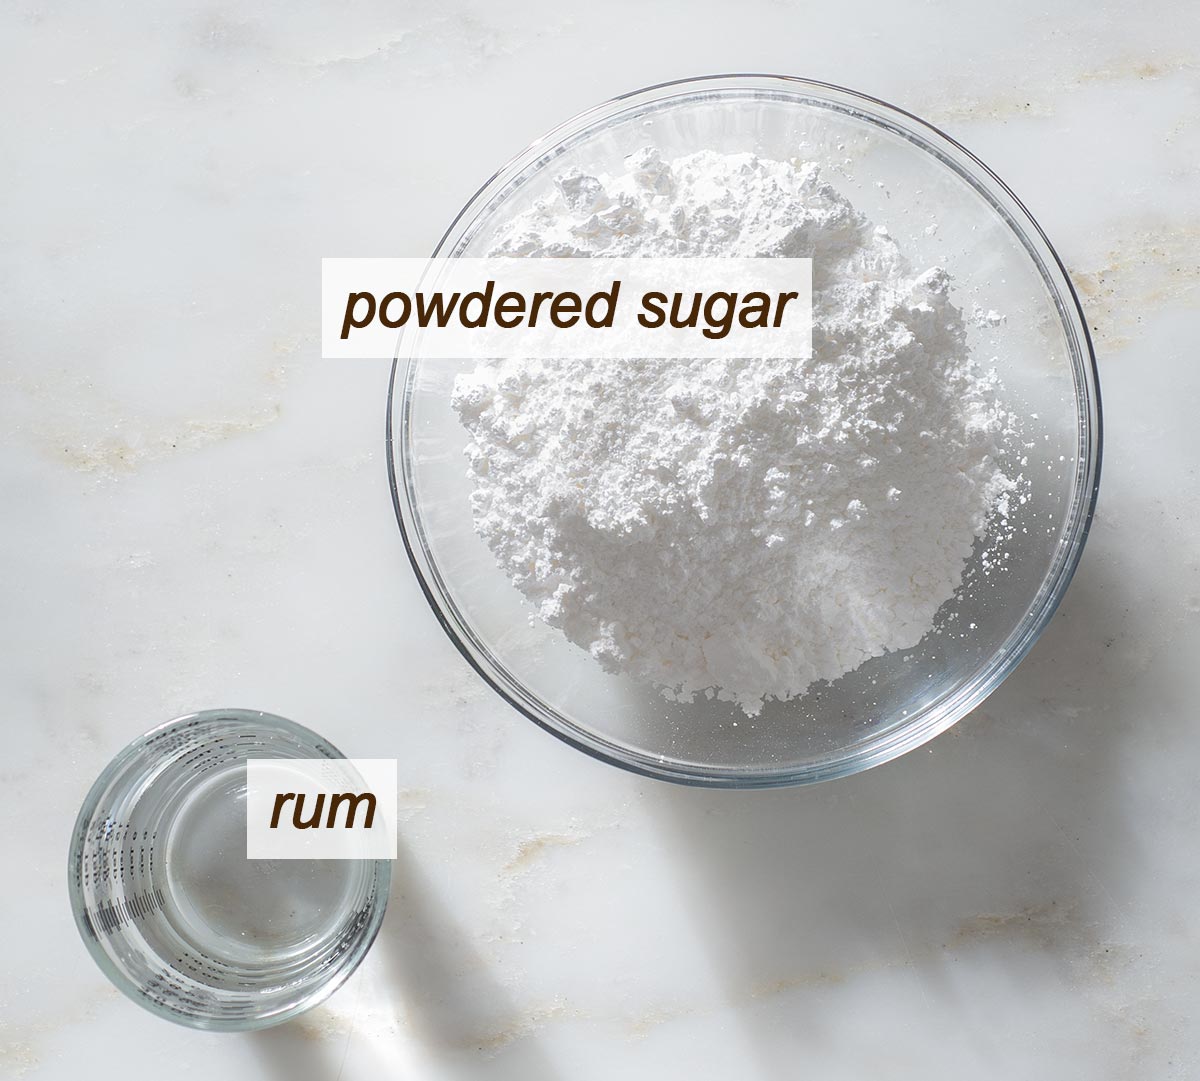 Powdered sugar and rum in bowls on a table.